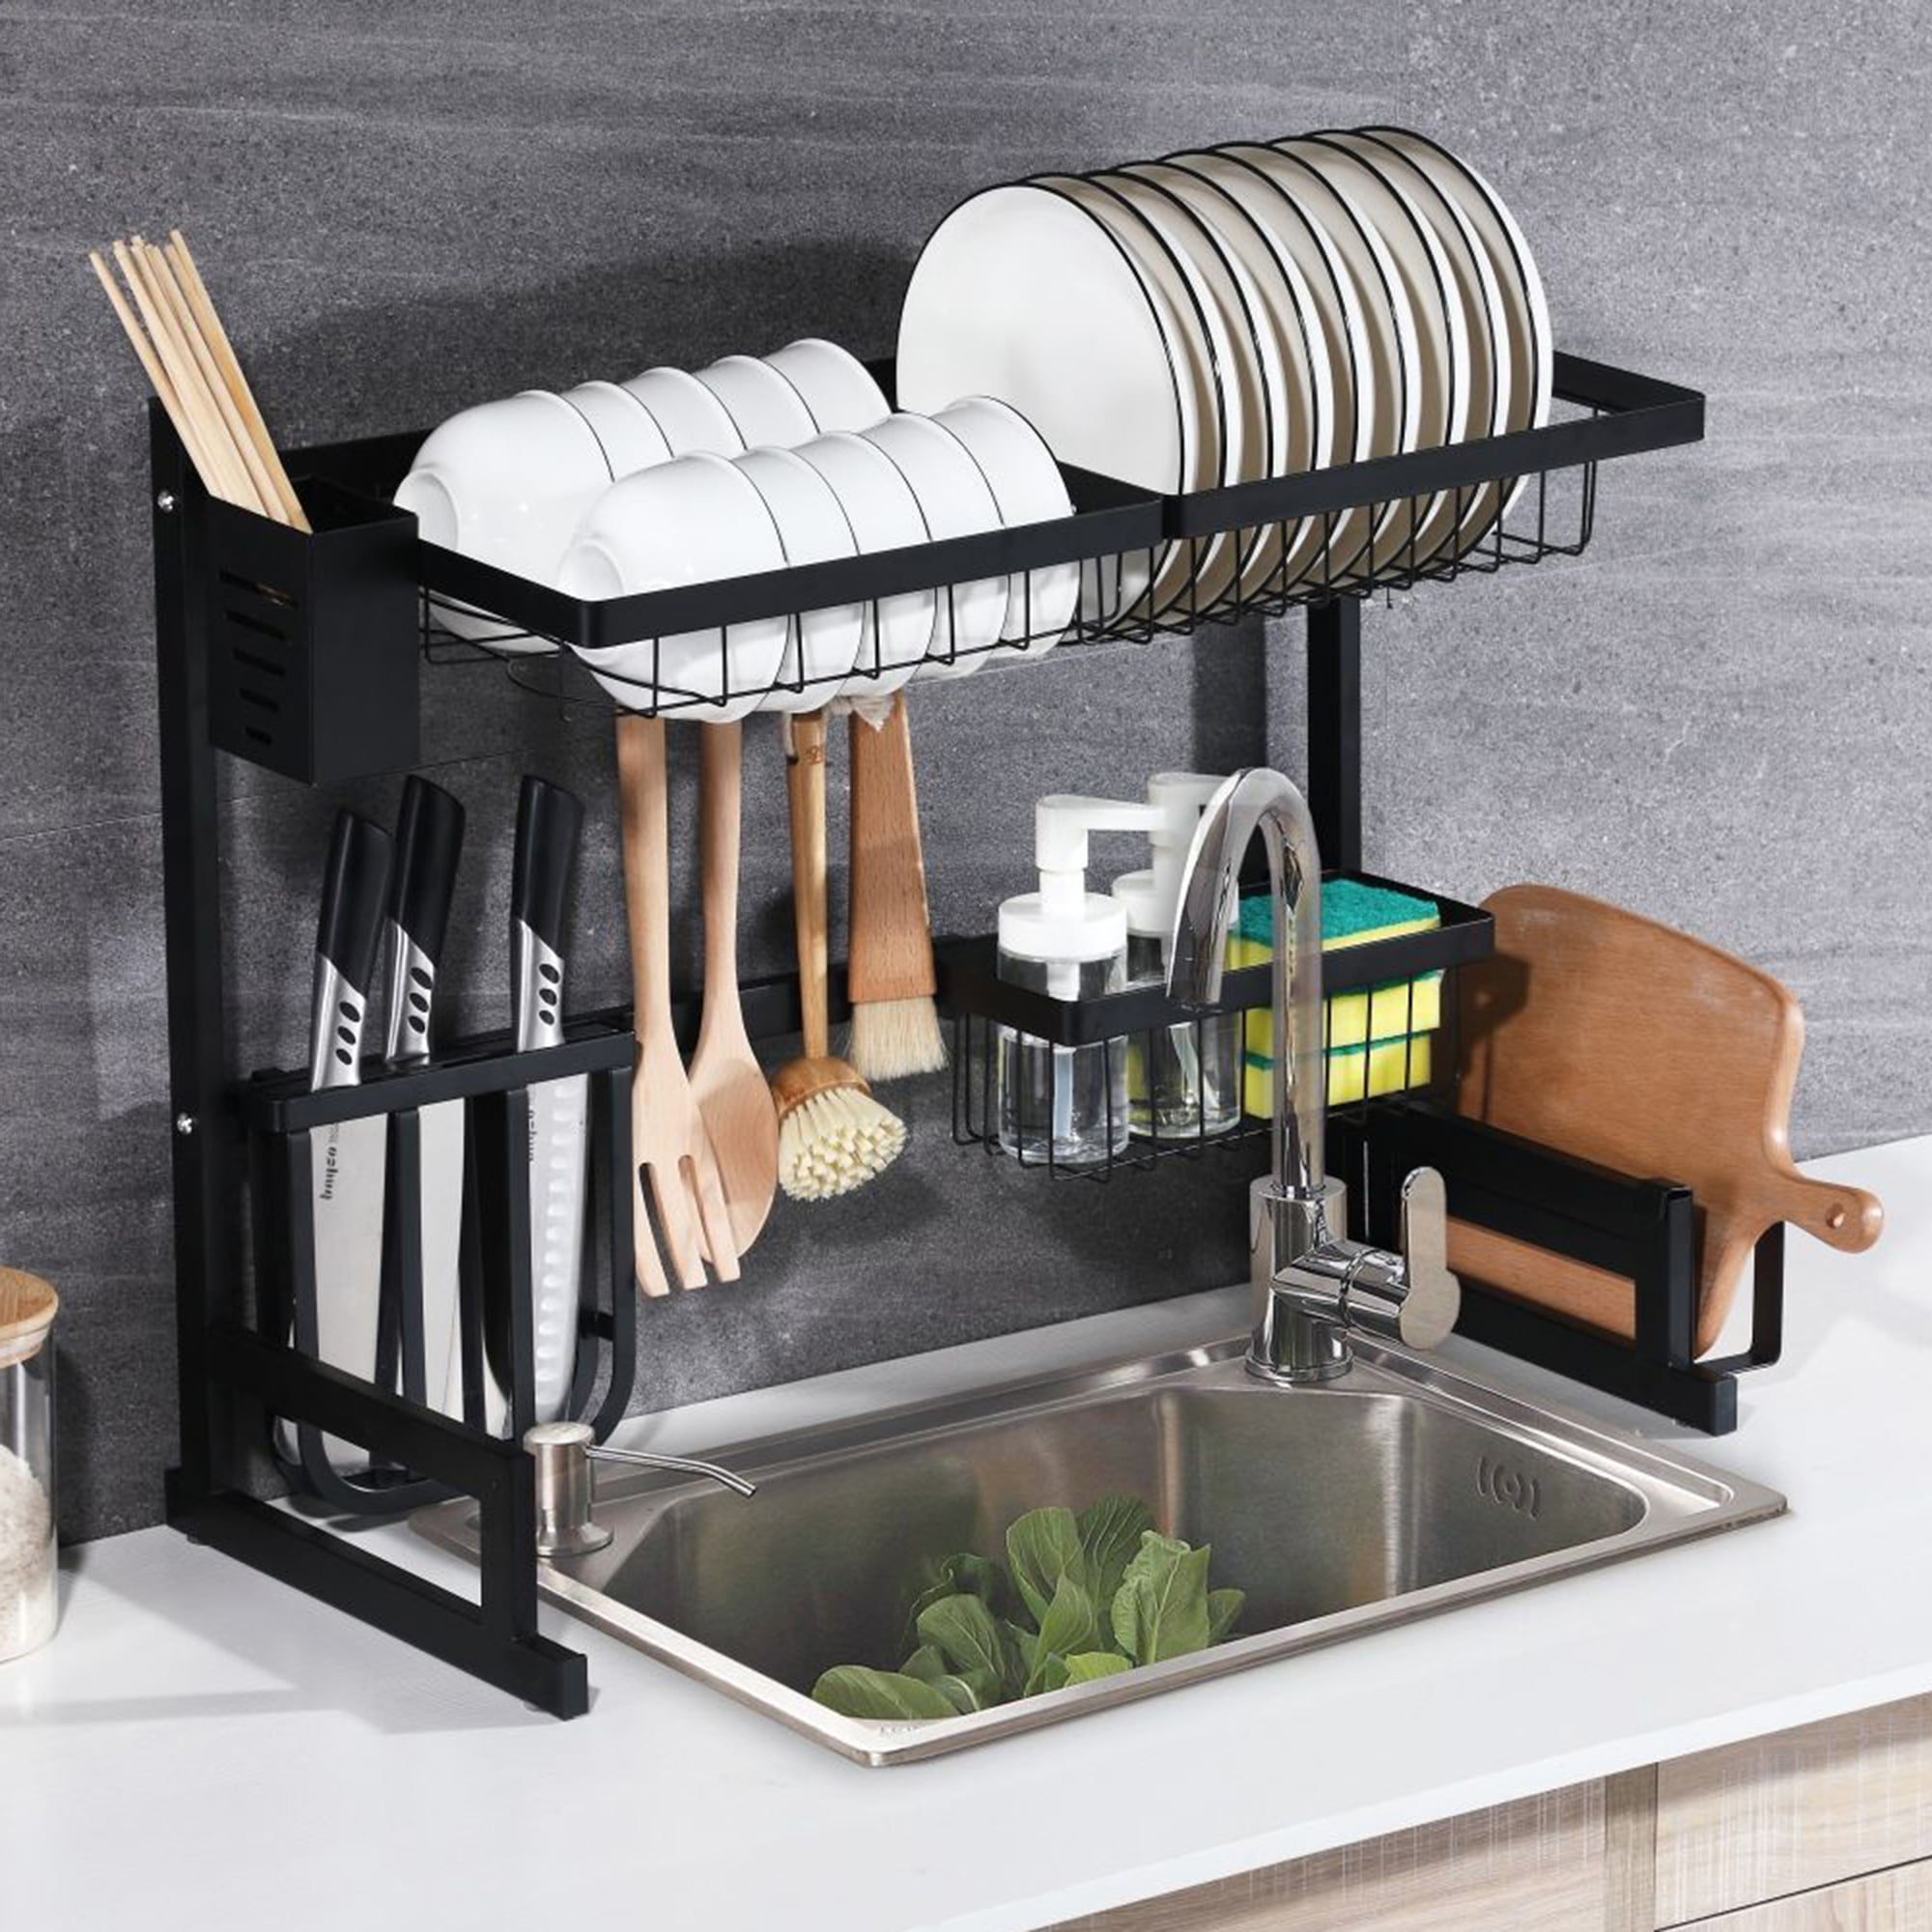 iSPECLE Premium 201 Stainless Steel Dish Rack with Utensil Holder Hooks Stable Bend Foot for Kitchen Countertop Space Saver Non-slip Black Over the Sink Dish Drying Rack